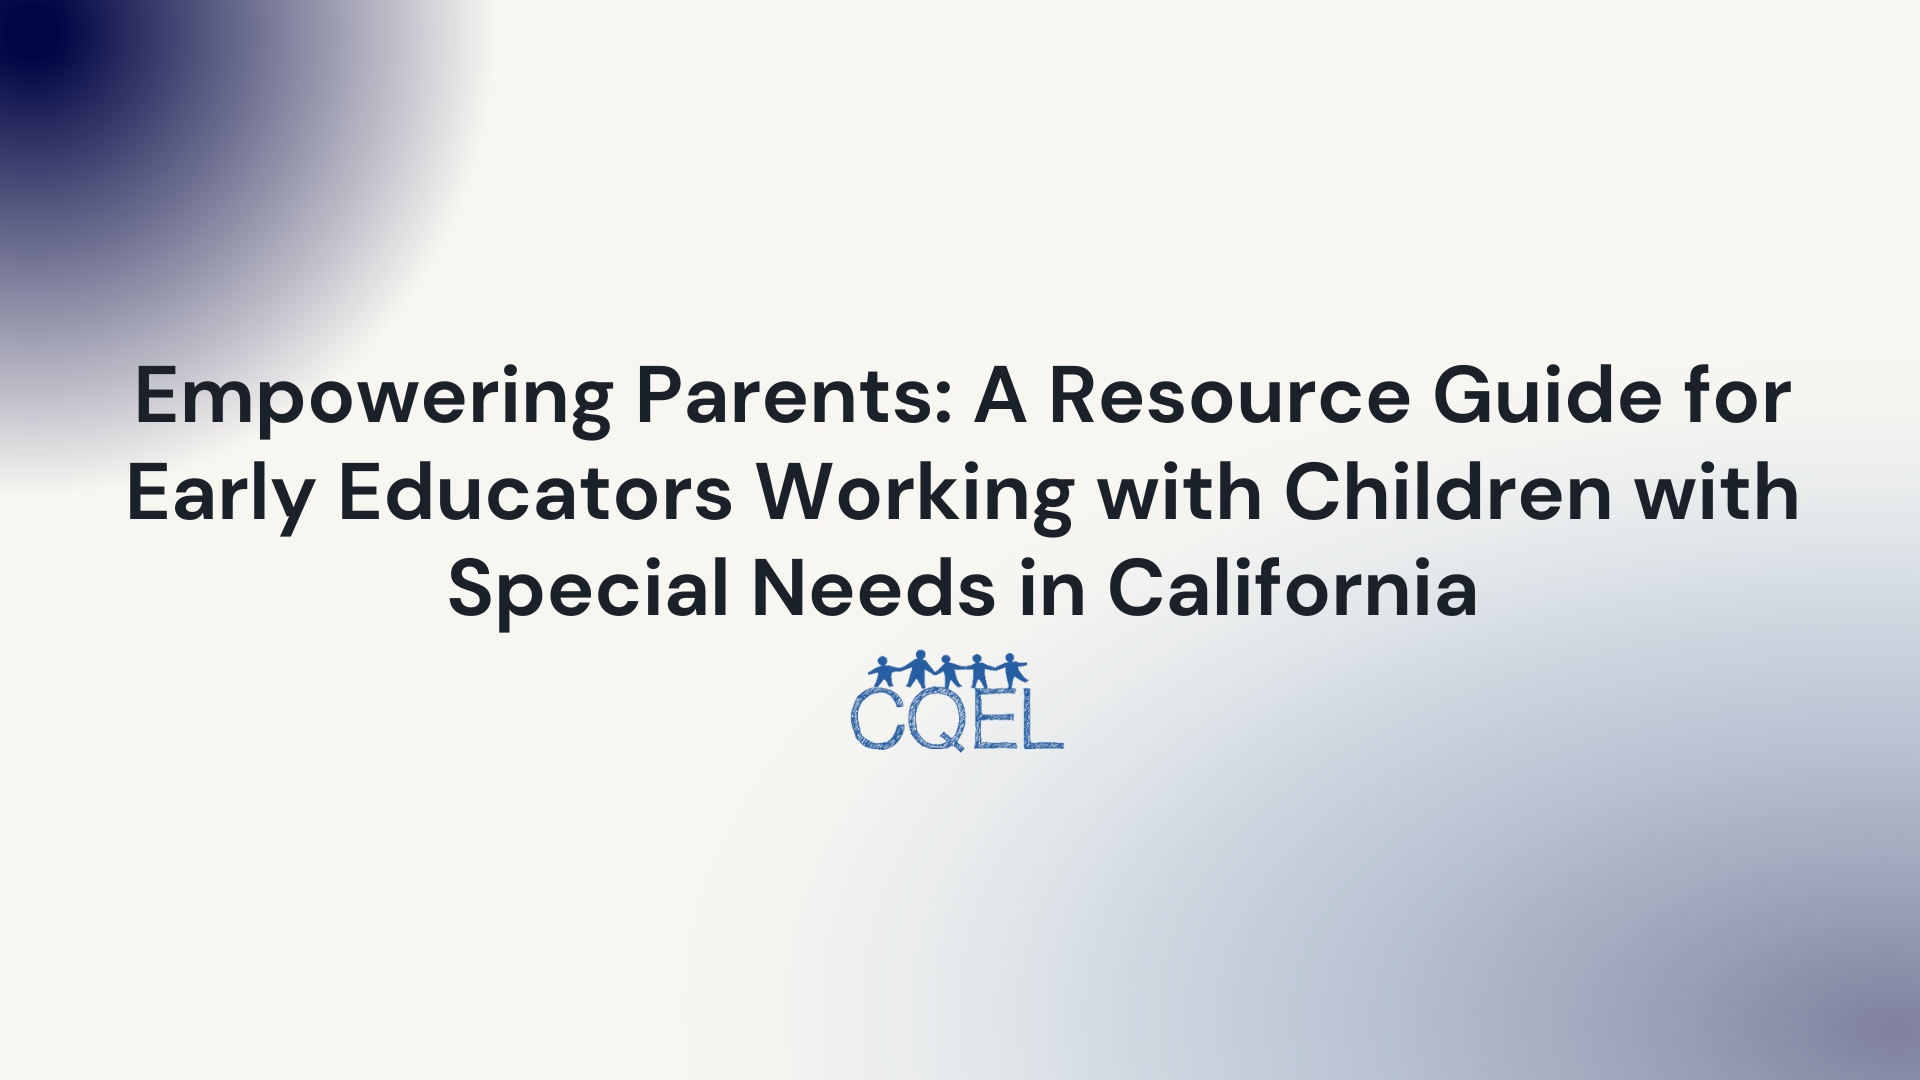 Empowering Parents: A Resource Guide for Early Educators Working with Children with Special Needs in California